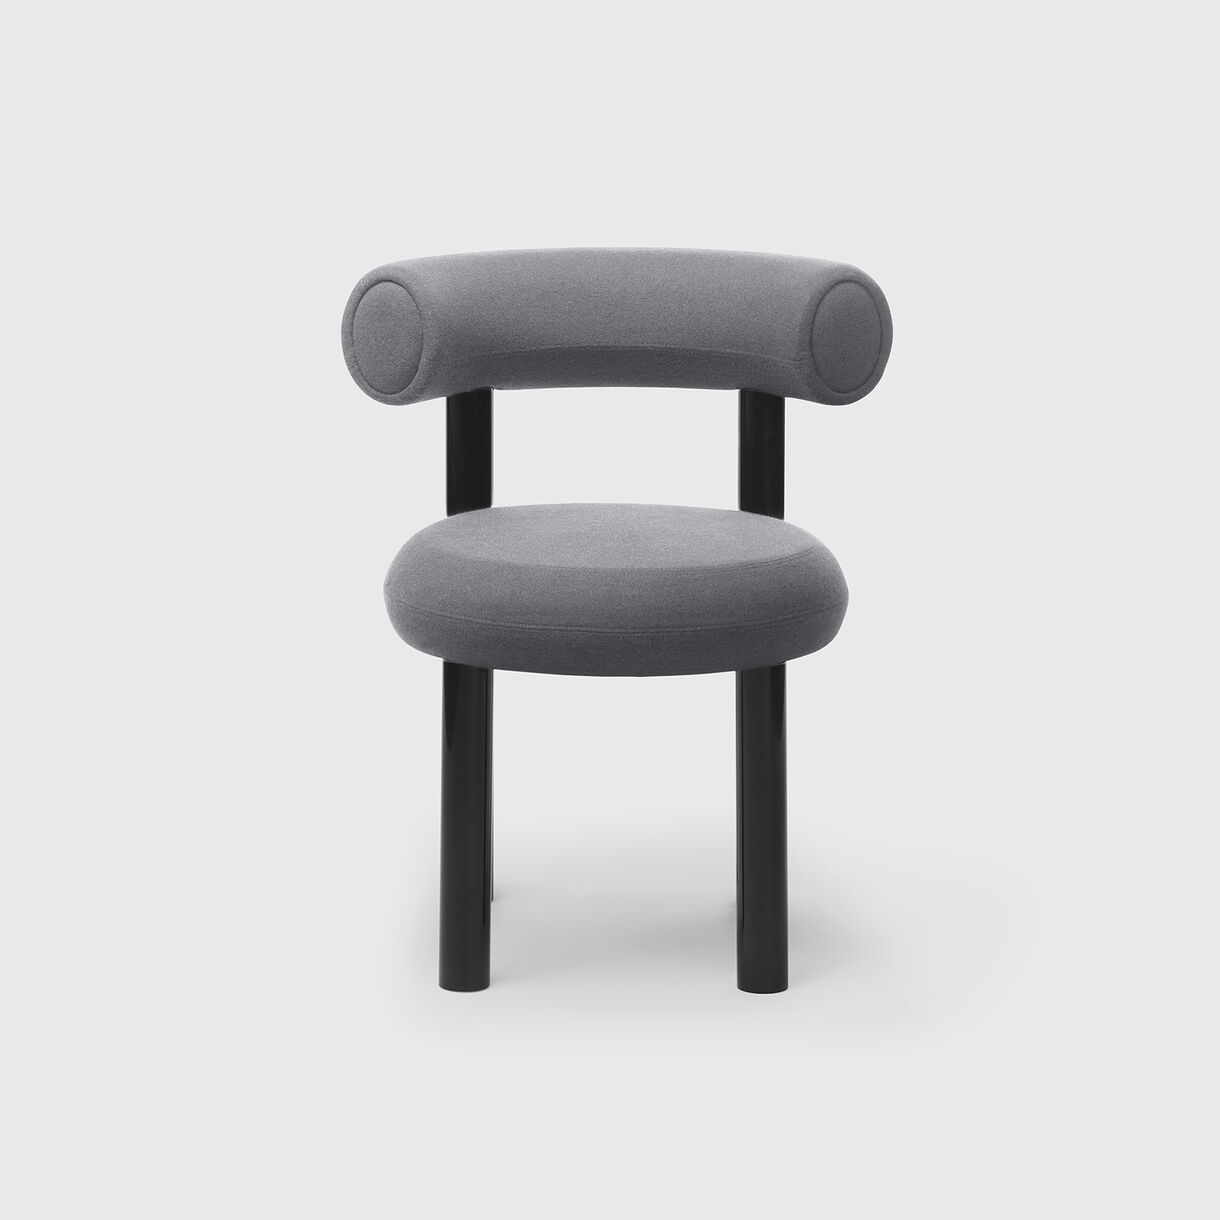 Fat Dining Chair, Gentle 2 - Light Grey